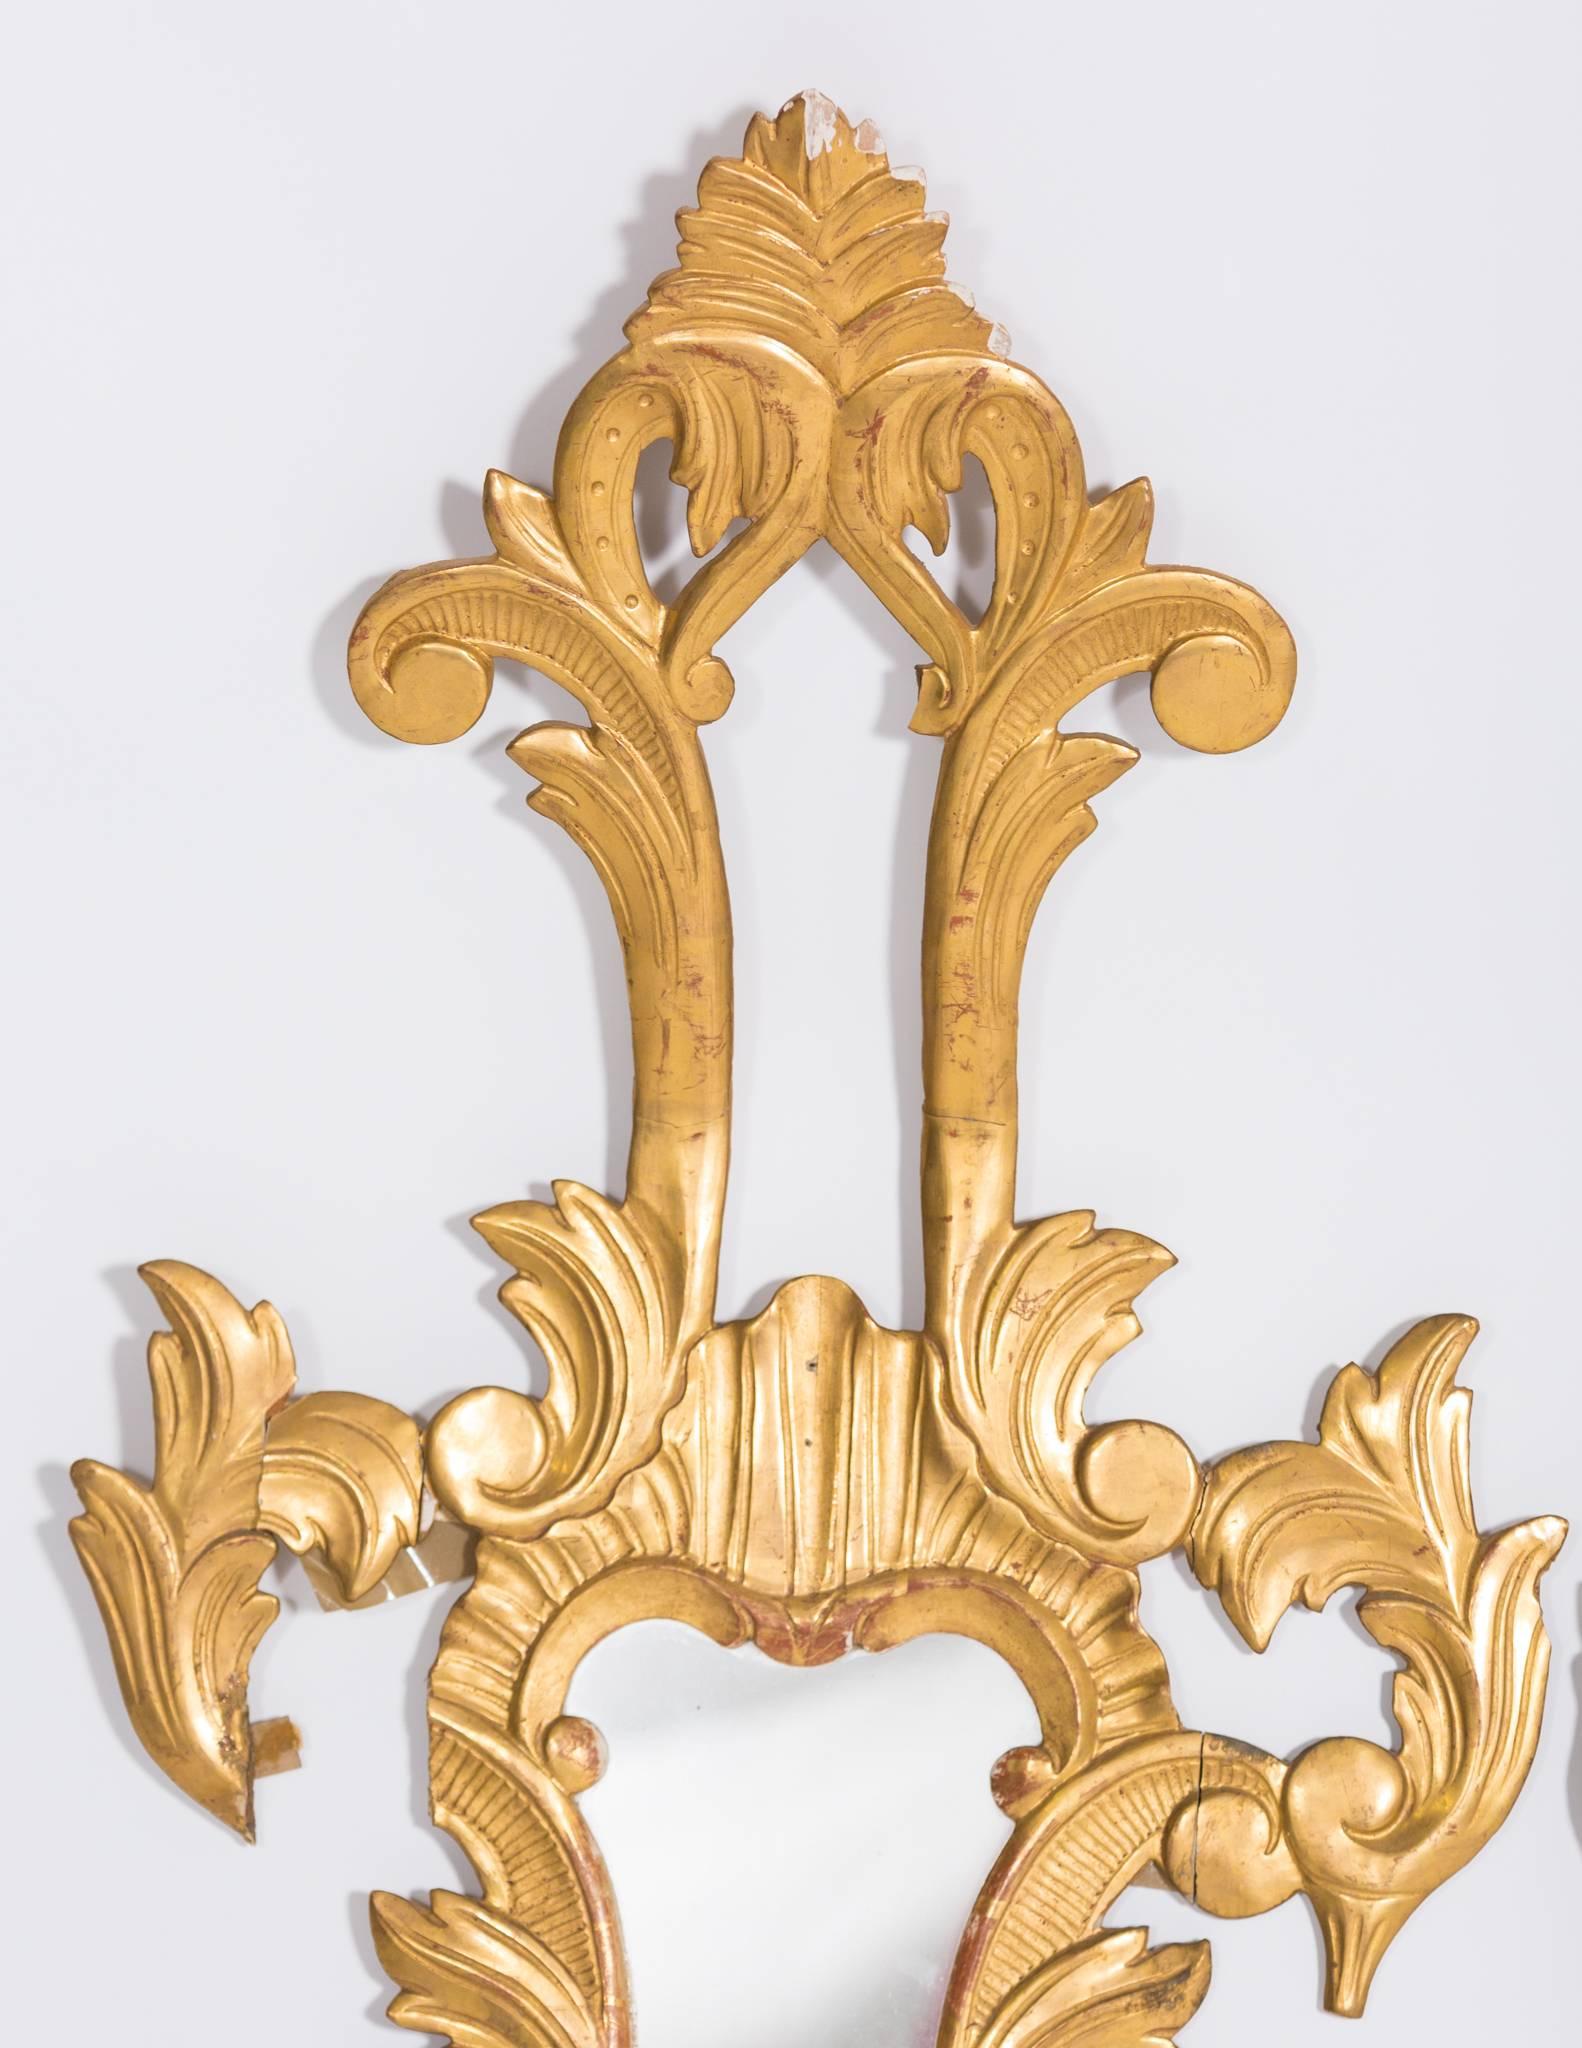 Pair of beautifully gilded Italian mirrors. Has scattered losses in wood and gilding. Scale is grand.

Measures: Approximately 0.5 D x 19 W x 36 W individually.